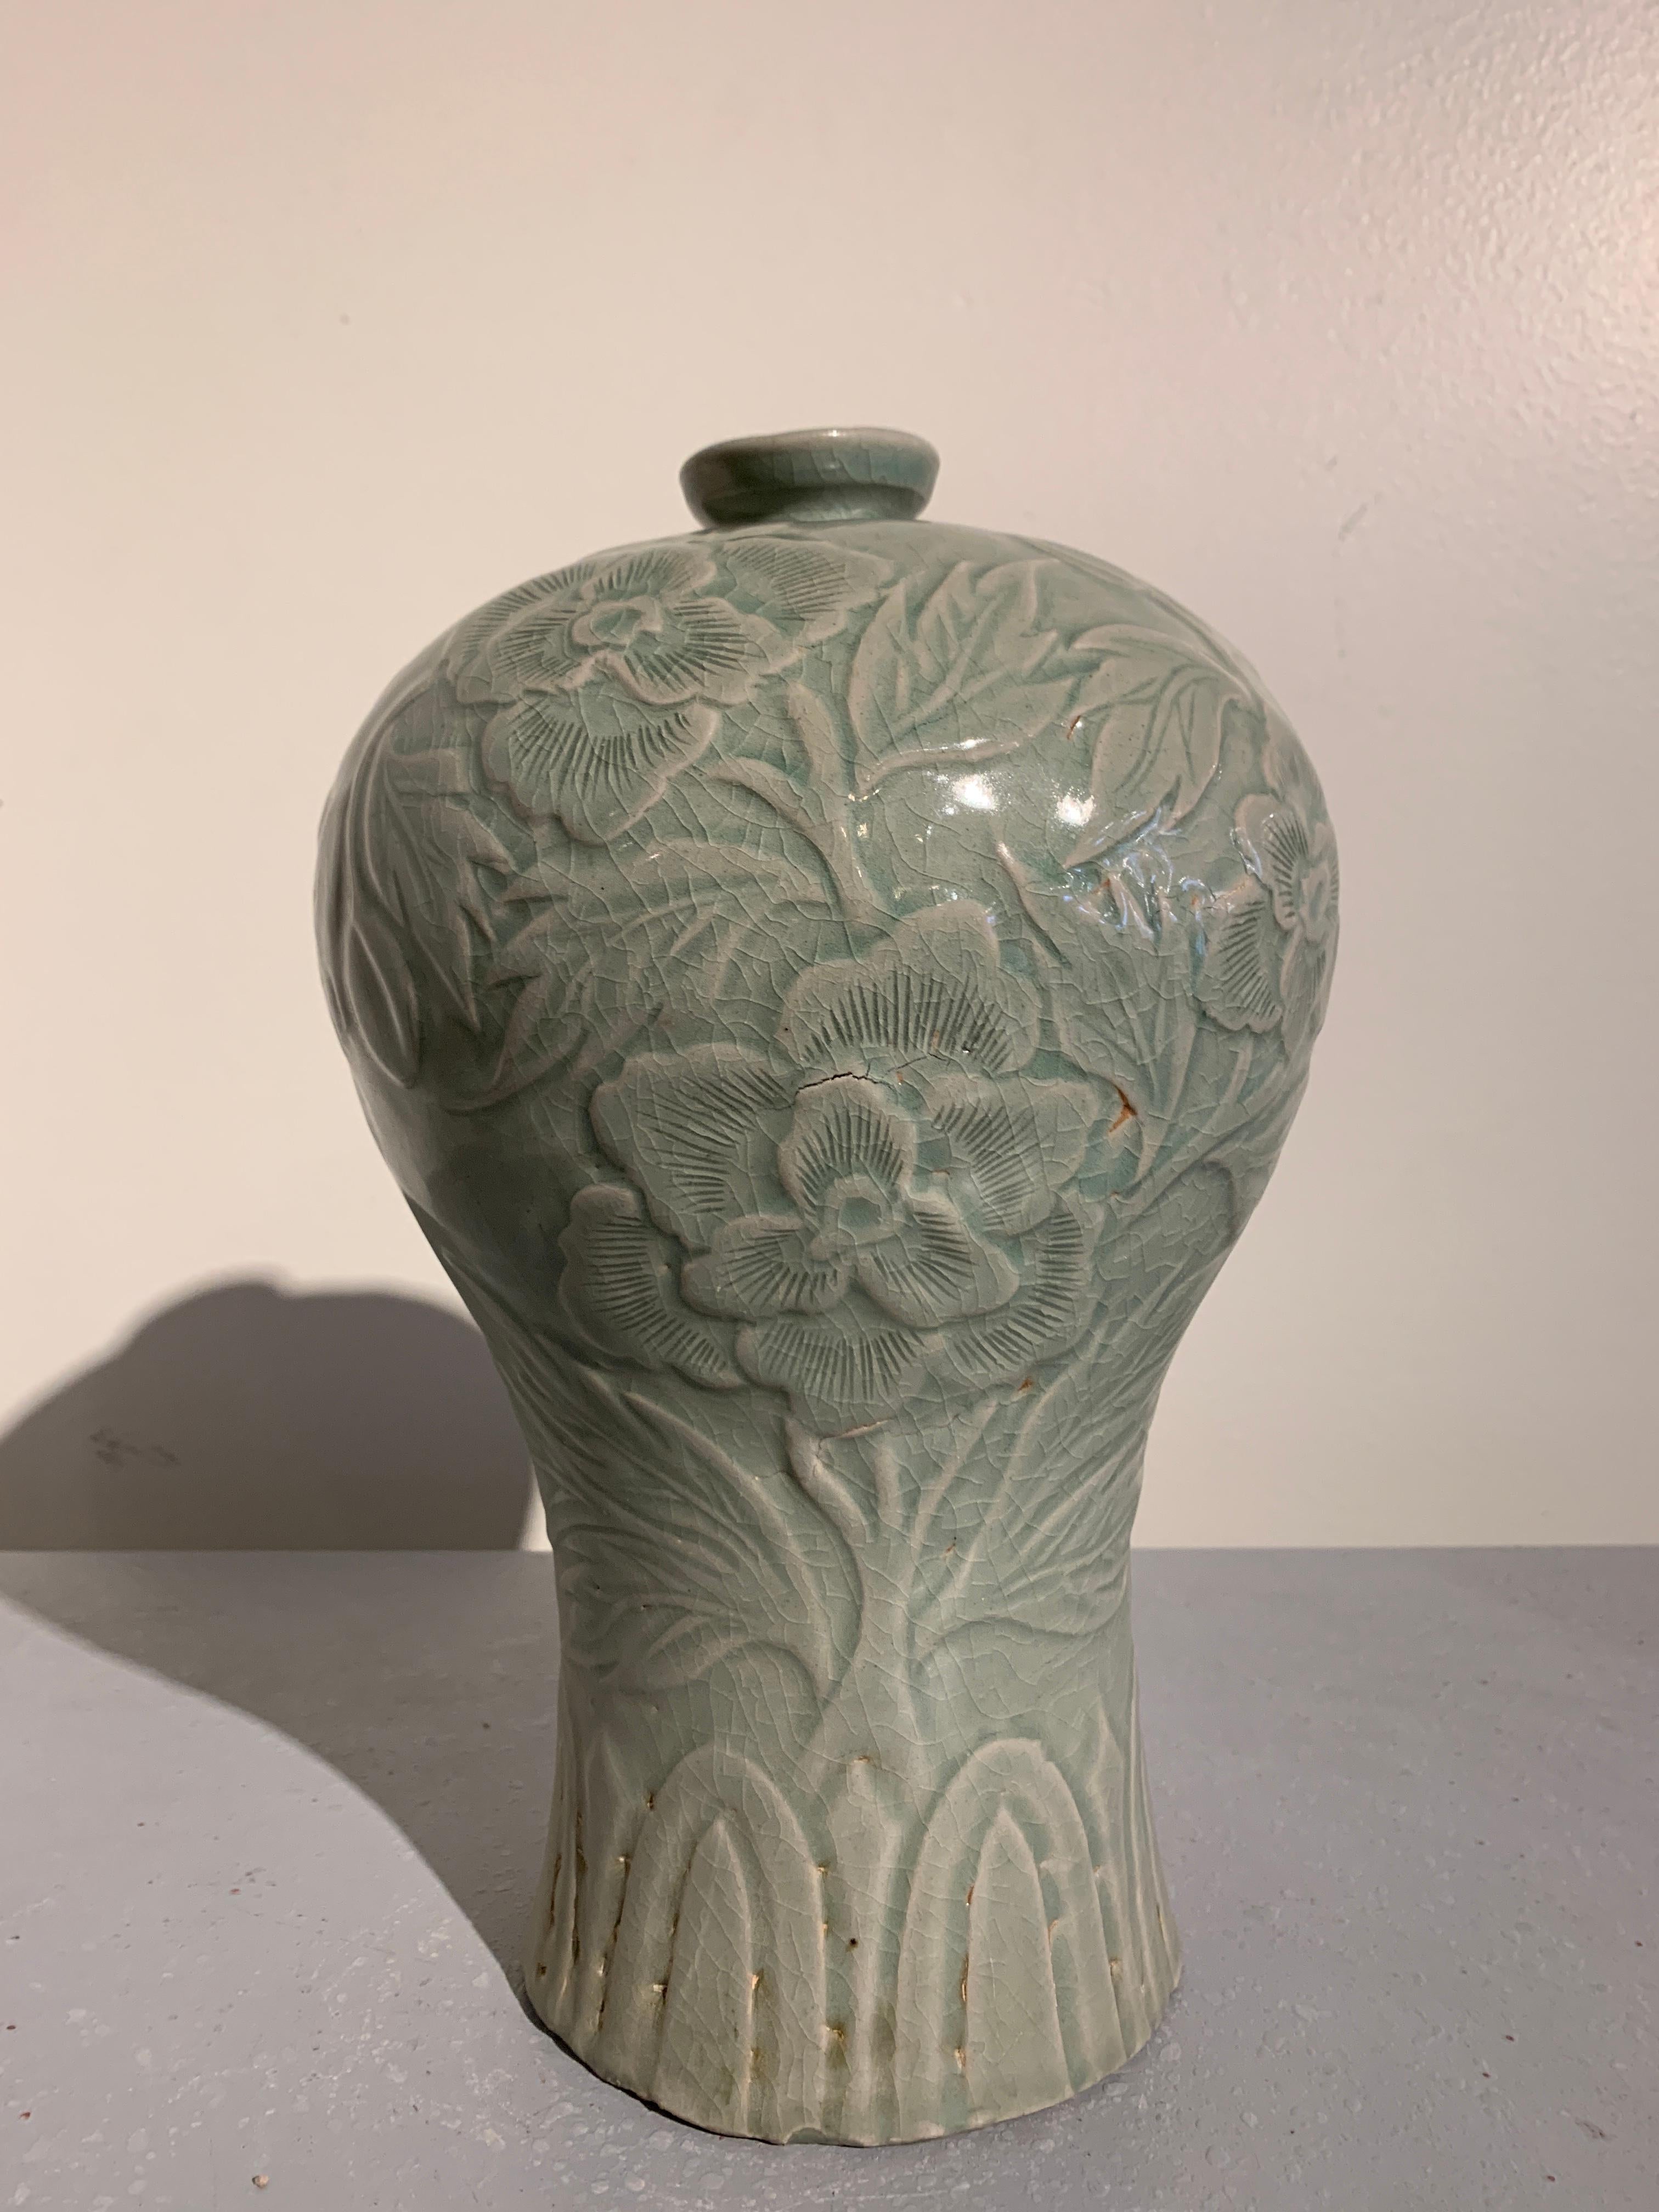 A wonderful Korean celadon vase, called a maebyeong, in the Goryeo style, but of early 20th century manufacture.

The maebyeong vase with a beautiful profile of Classic Chinese meiping form, with a wide, splayed foot, narrow waist, rounded body